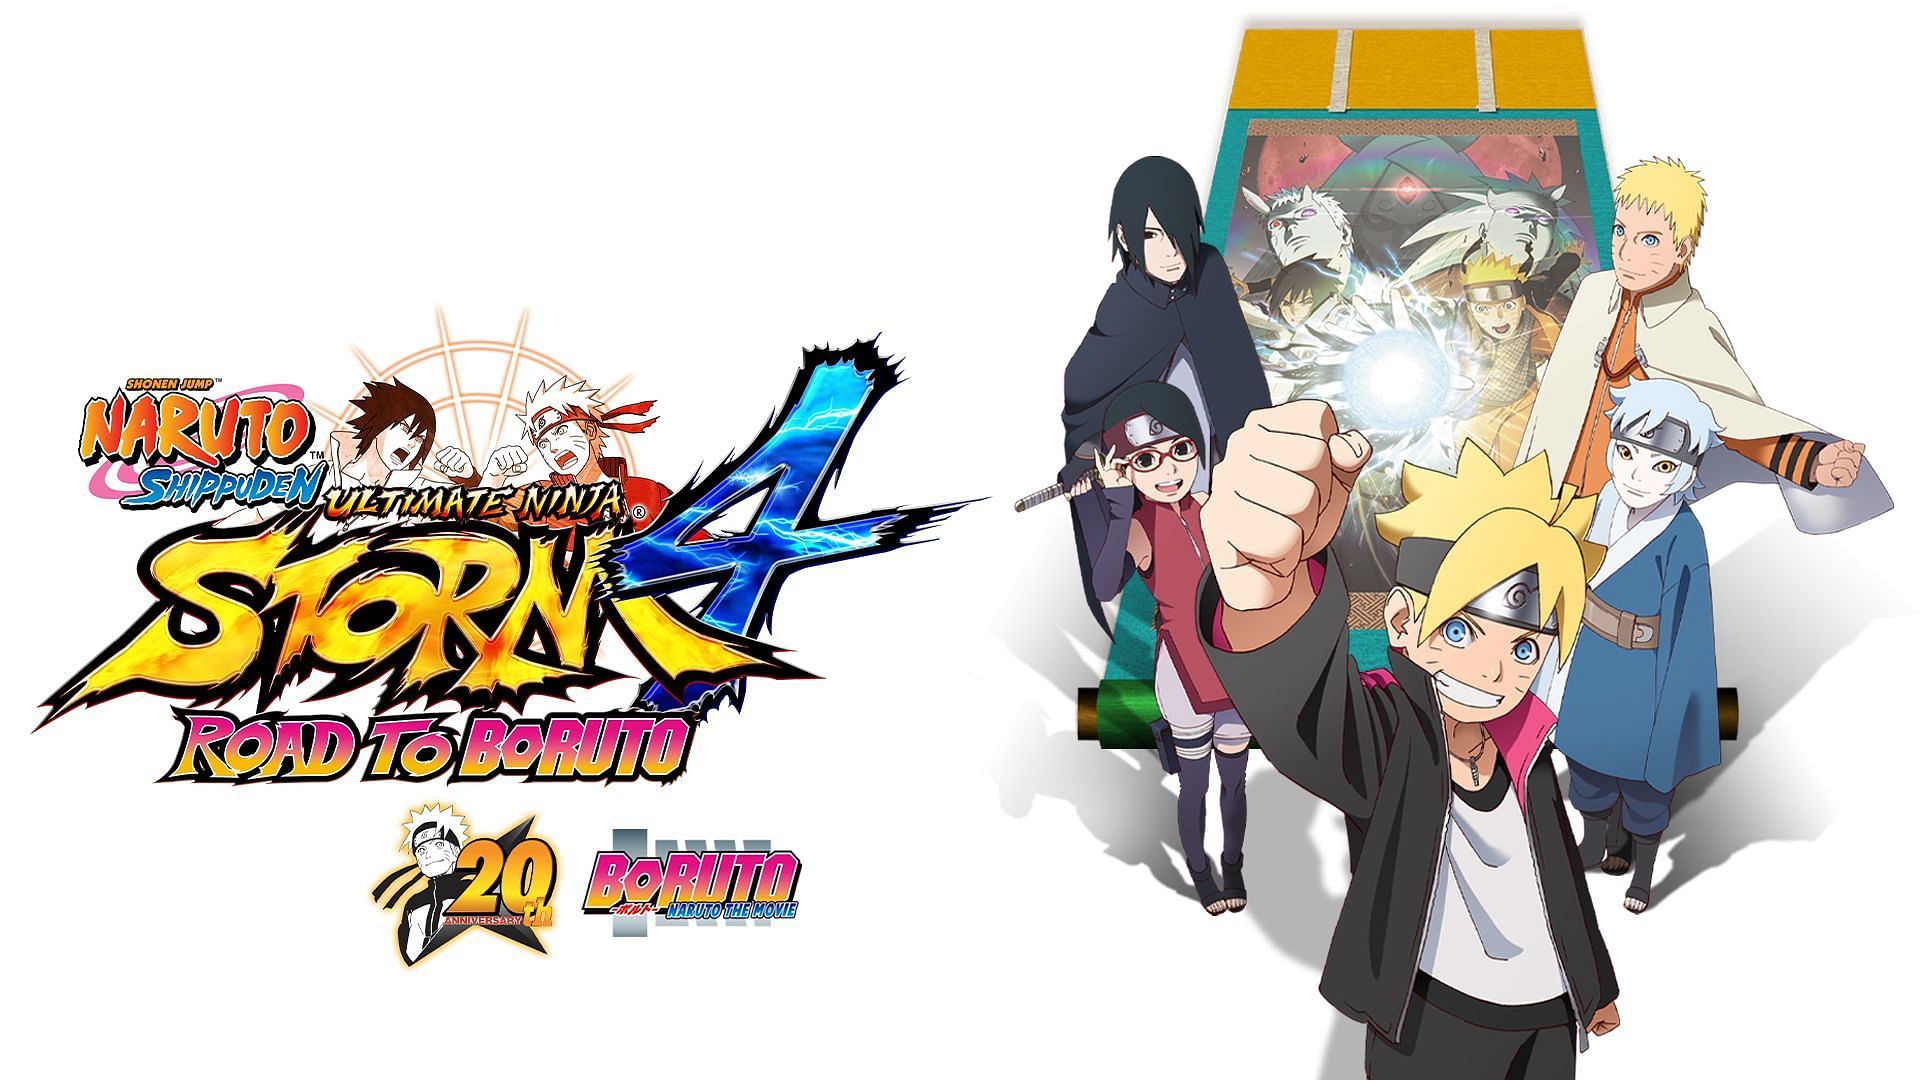 Some of the best video games from the Naruto anime and manga series (Image via Nintendo)